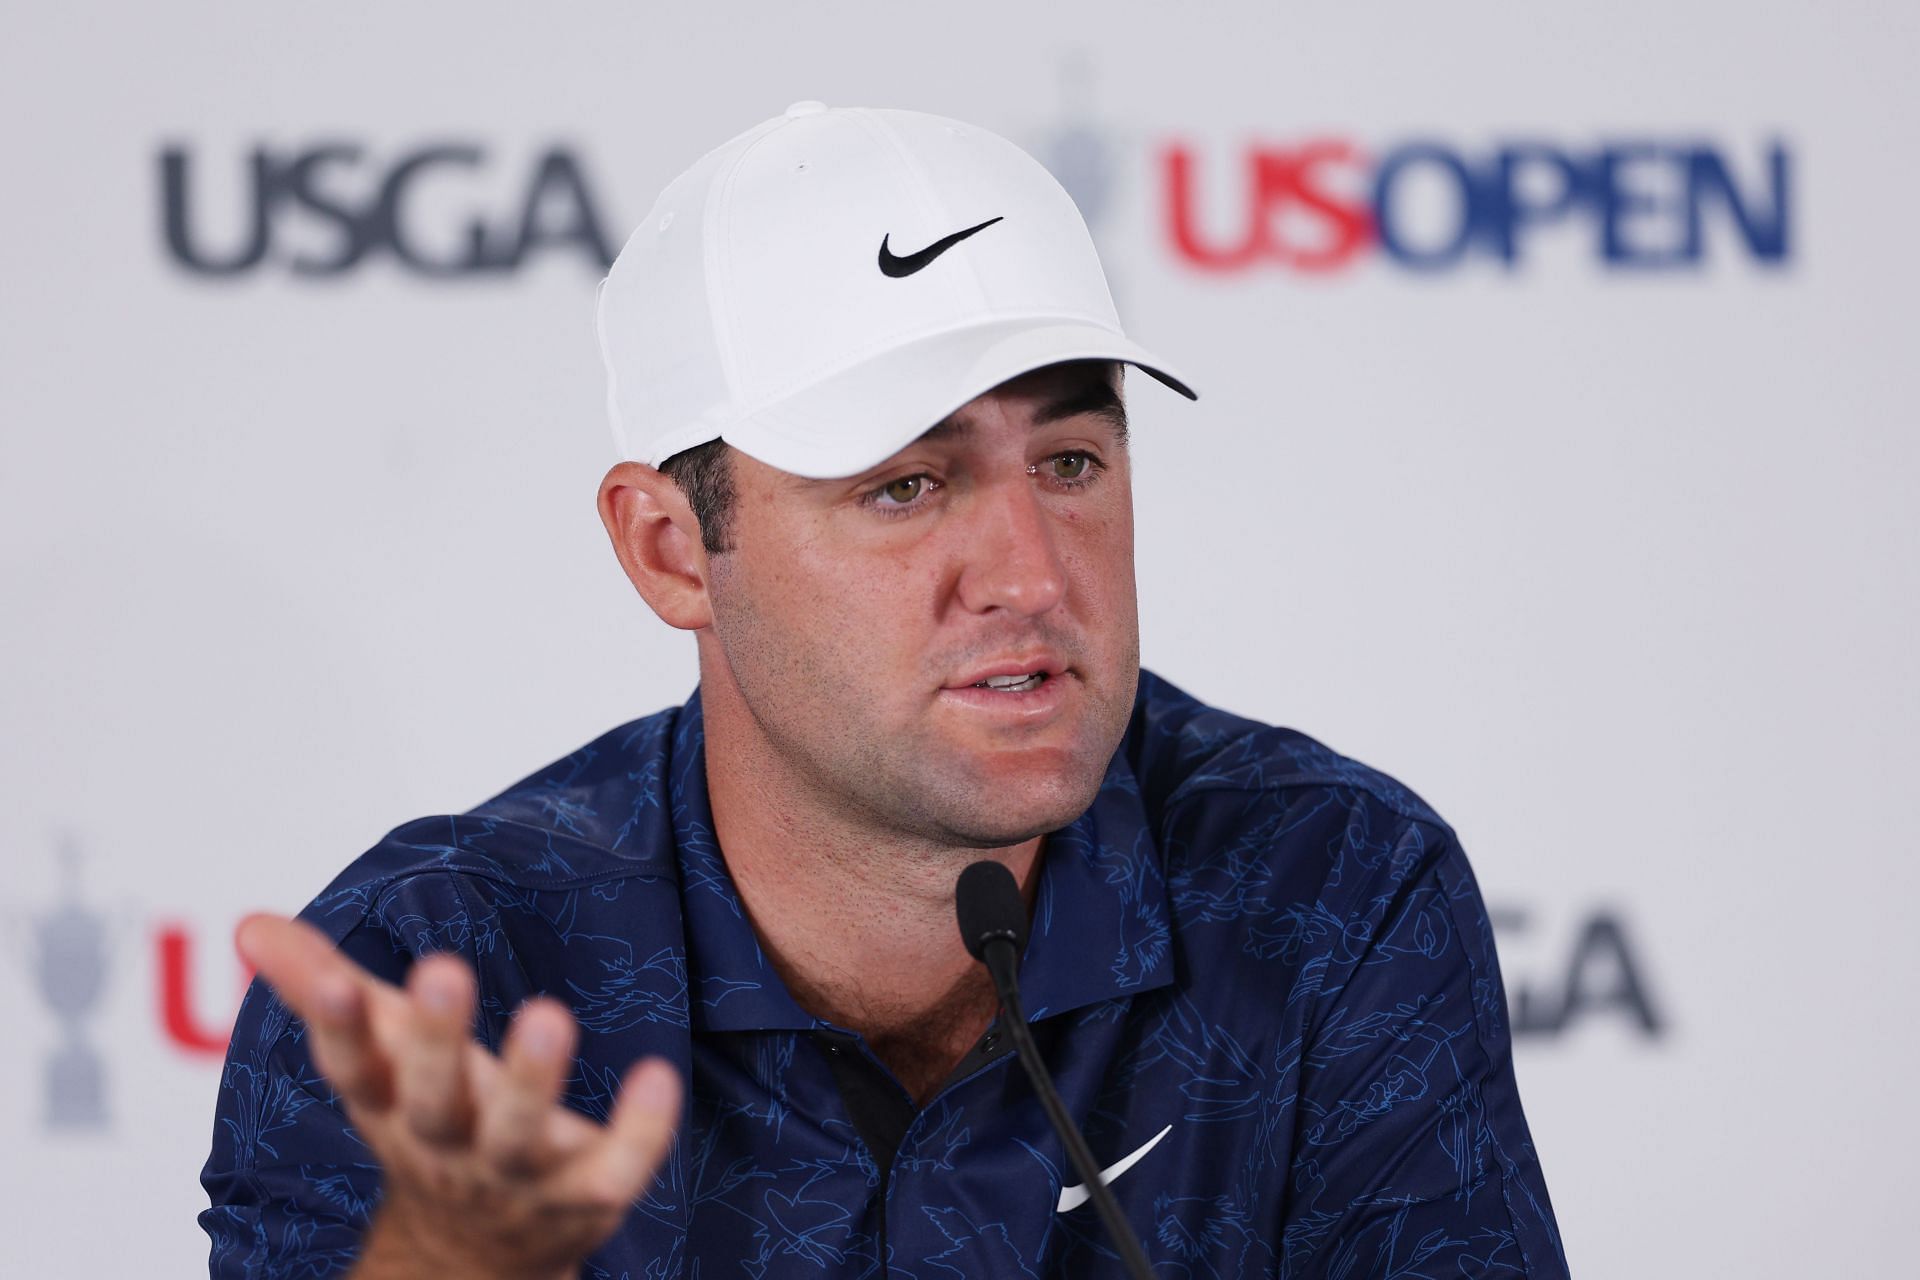 Top 5 golfers who are the 2023 US Open Golf favorites